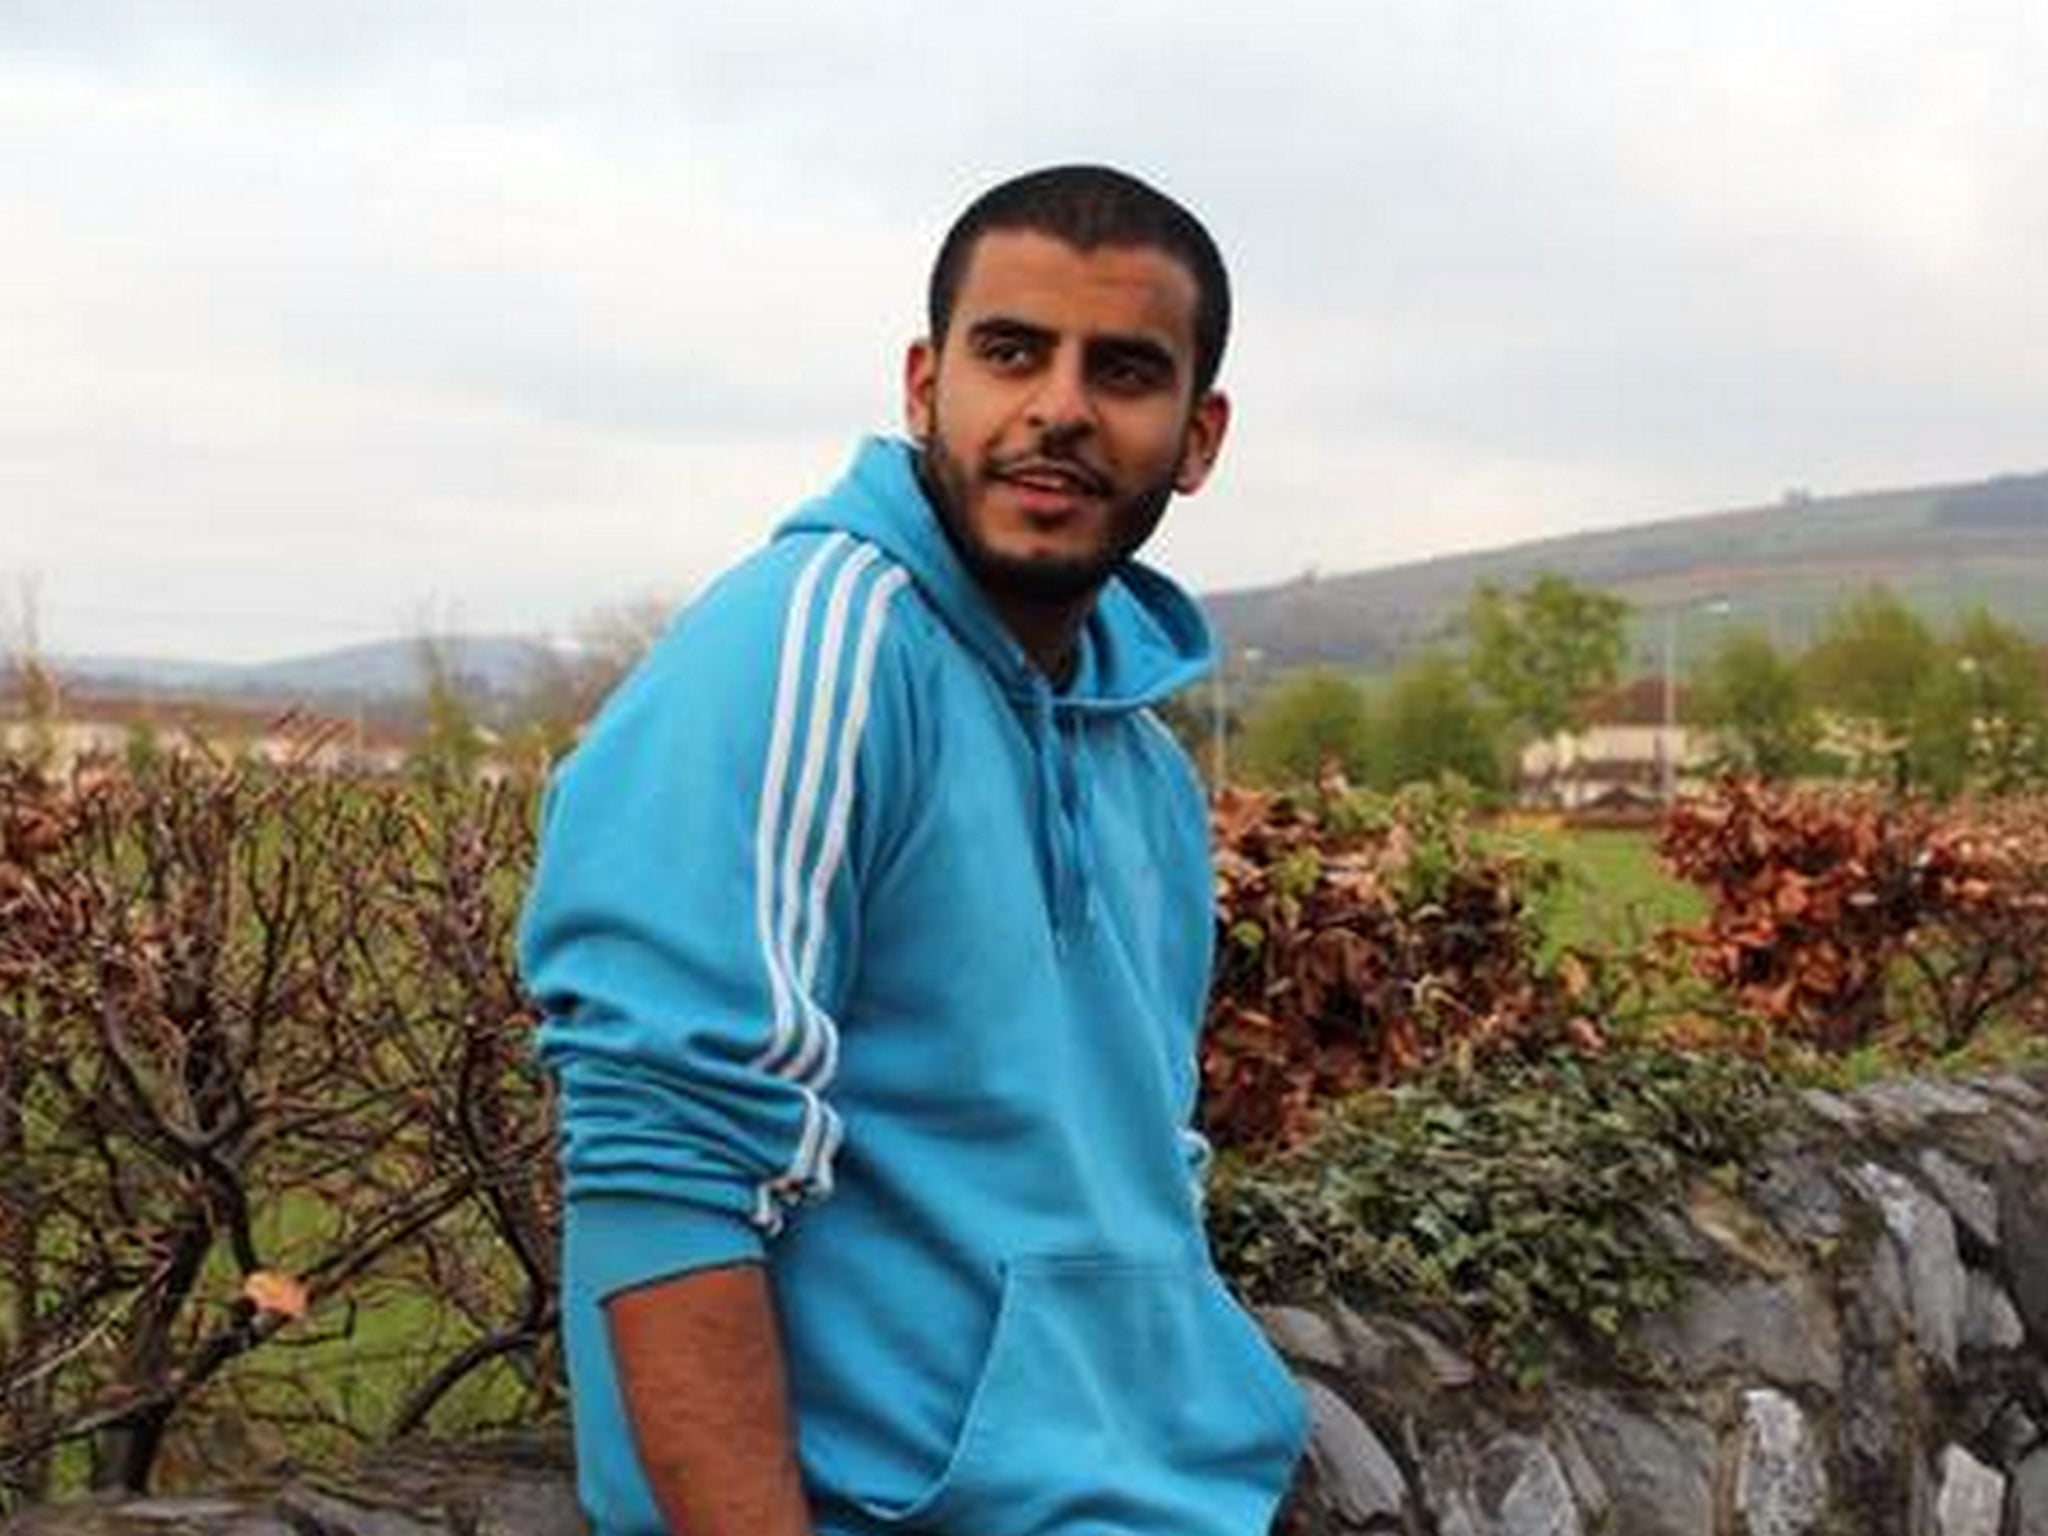 Dublin-born Ibrahim Halawa, now 20, was arrested with his three sisters after being caught up in protests in Cairo in August 2013